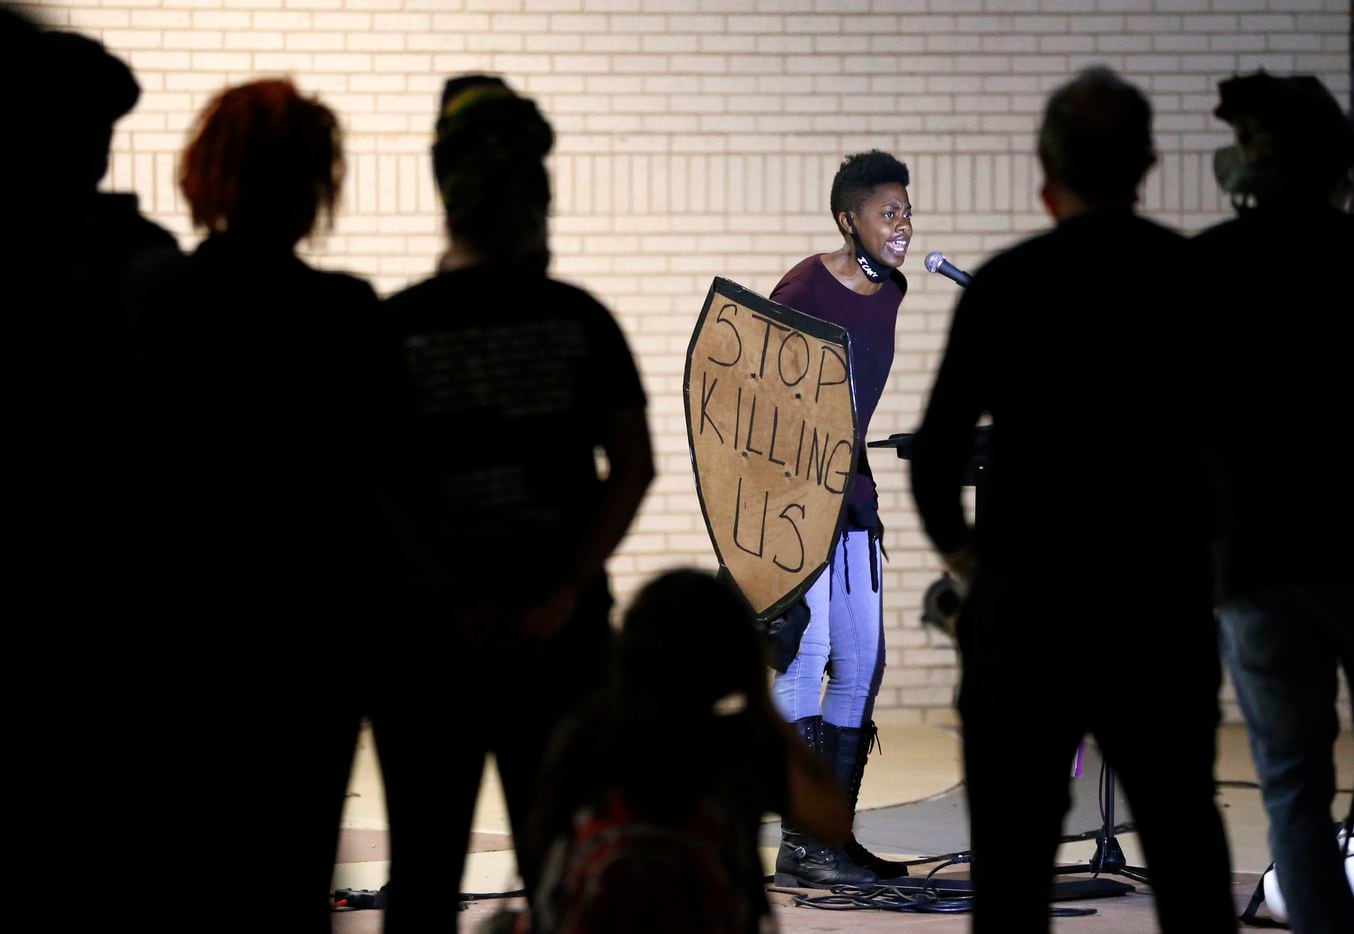 A woman who goes by the name of Ash delivers an emotional speech during a Next Generation Action Network protest outside of Dallas Police Headquarters in Dallas, Wednesday, September 23, 2020.  A Kentucky grand jury brought no charges against the Louisville police for the killing of Breonna Taylor during a drug raid gone wrong. (Tom Fox/The Dallas Morning News)